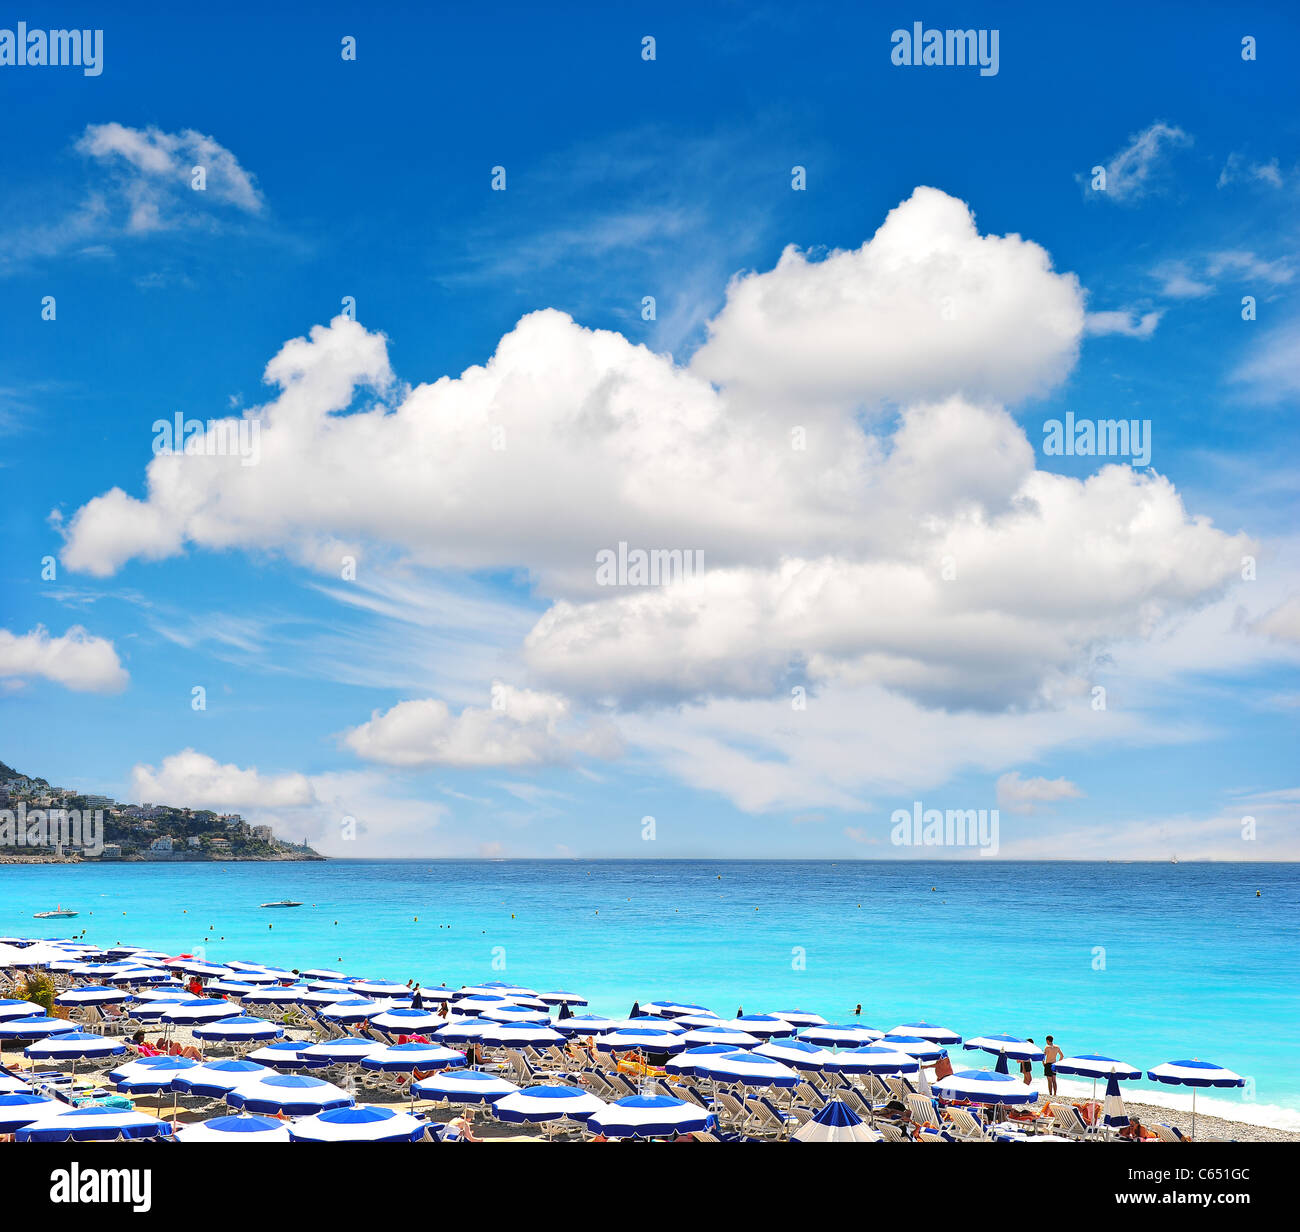 View of beach resort, Nice, France. Holiday background with beautiful blue sky Stock Photo